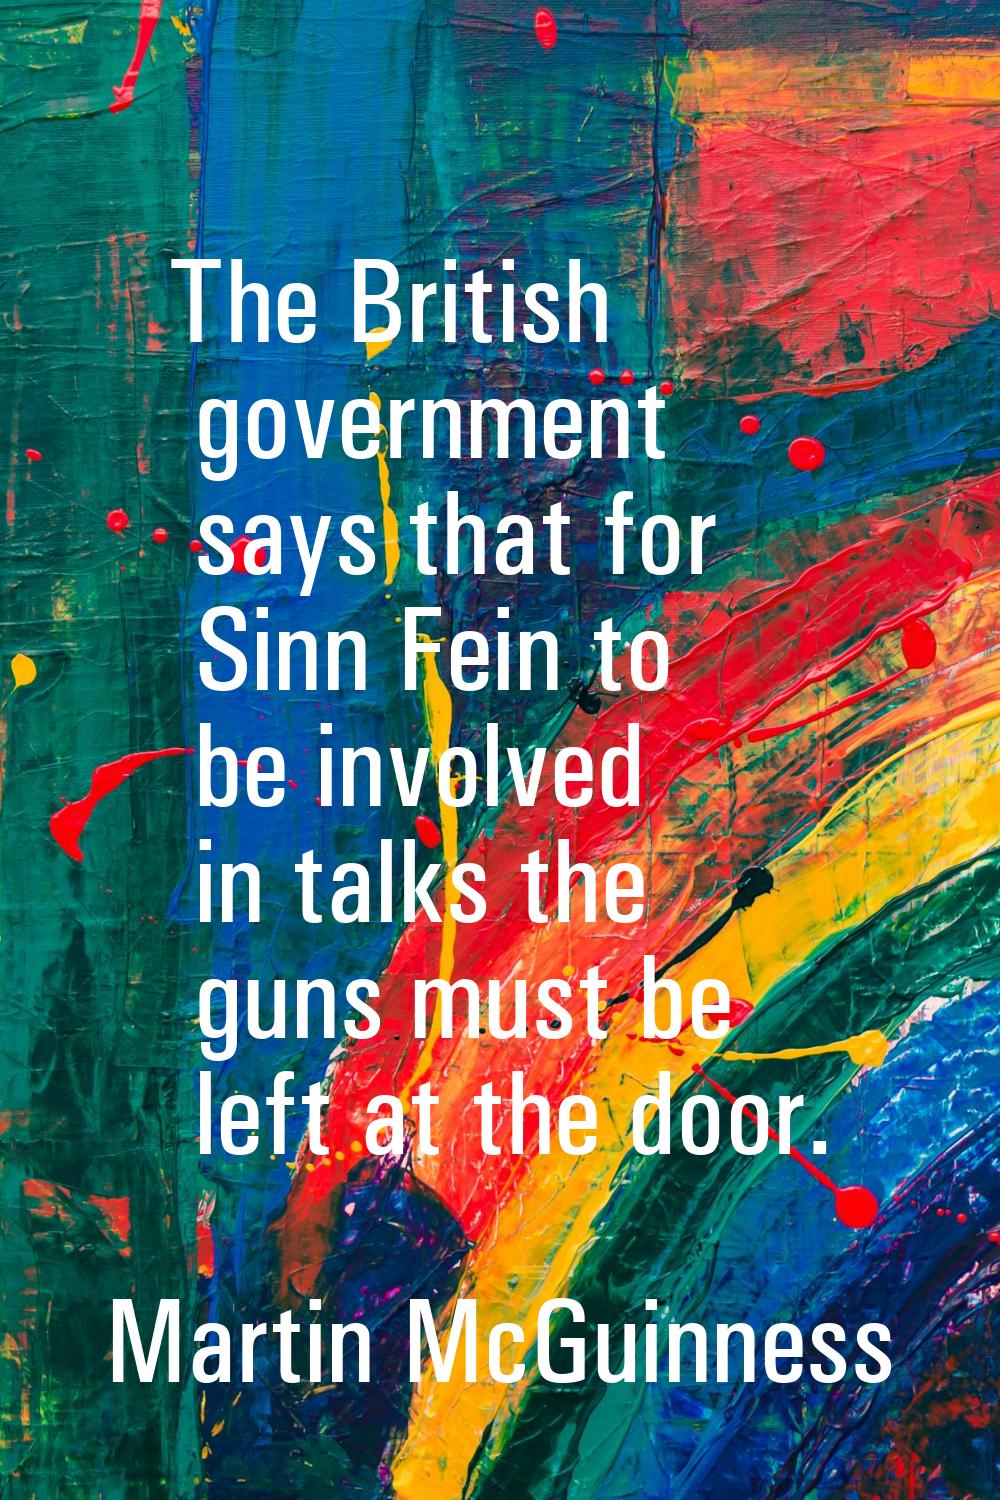 The British government says that for Sinn Fein to be involved in talks the guns must be left at the